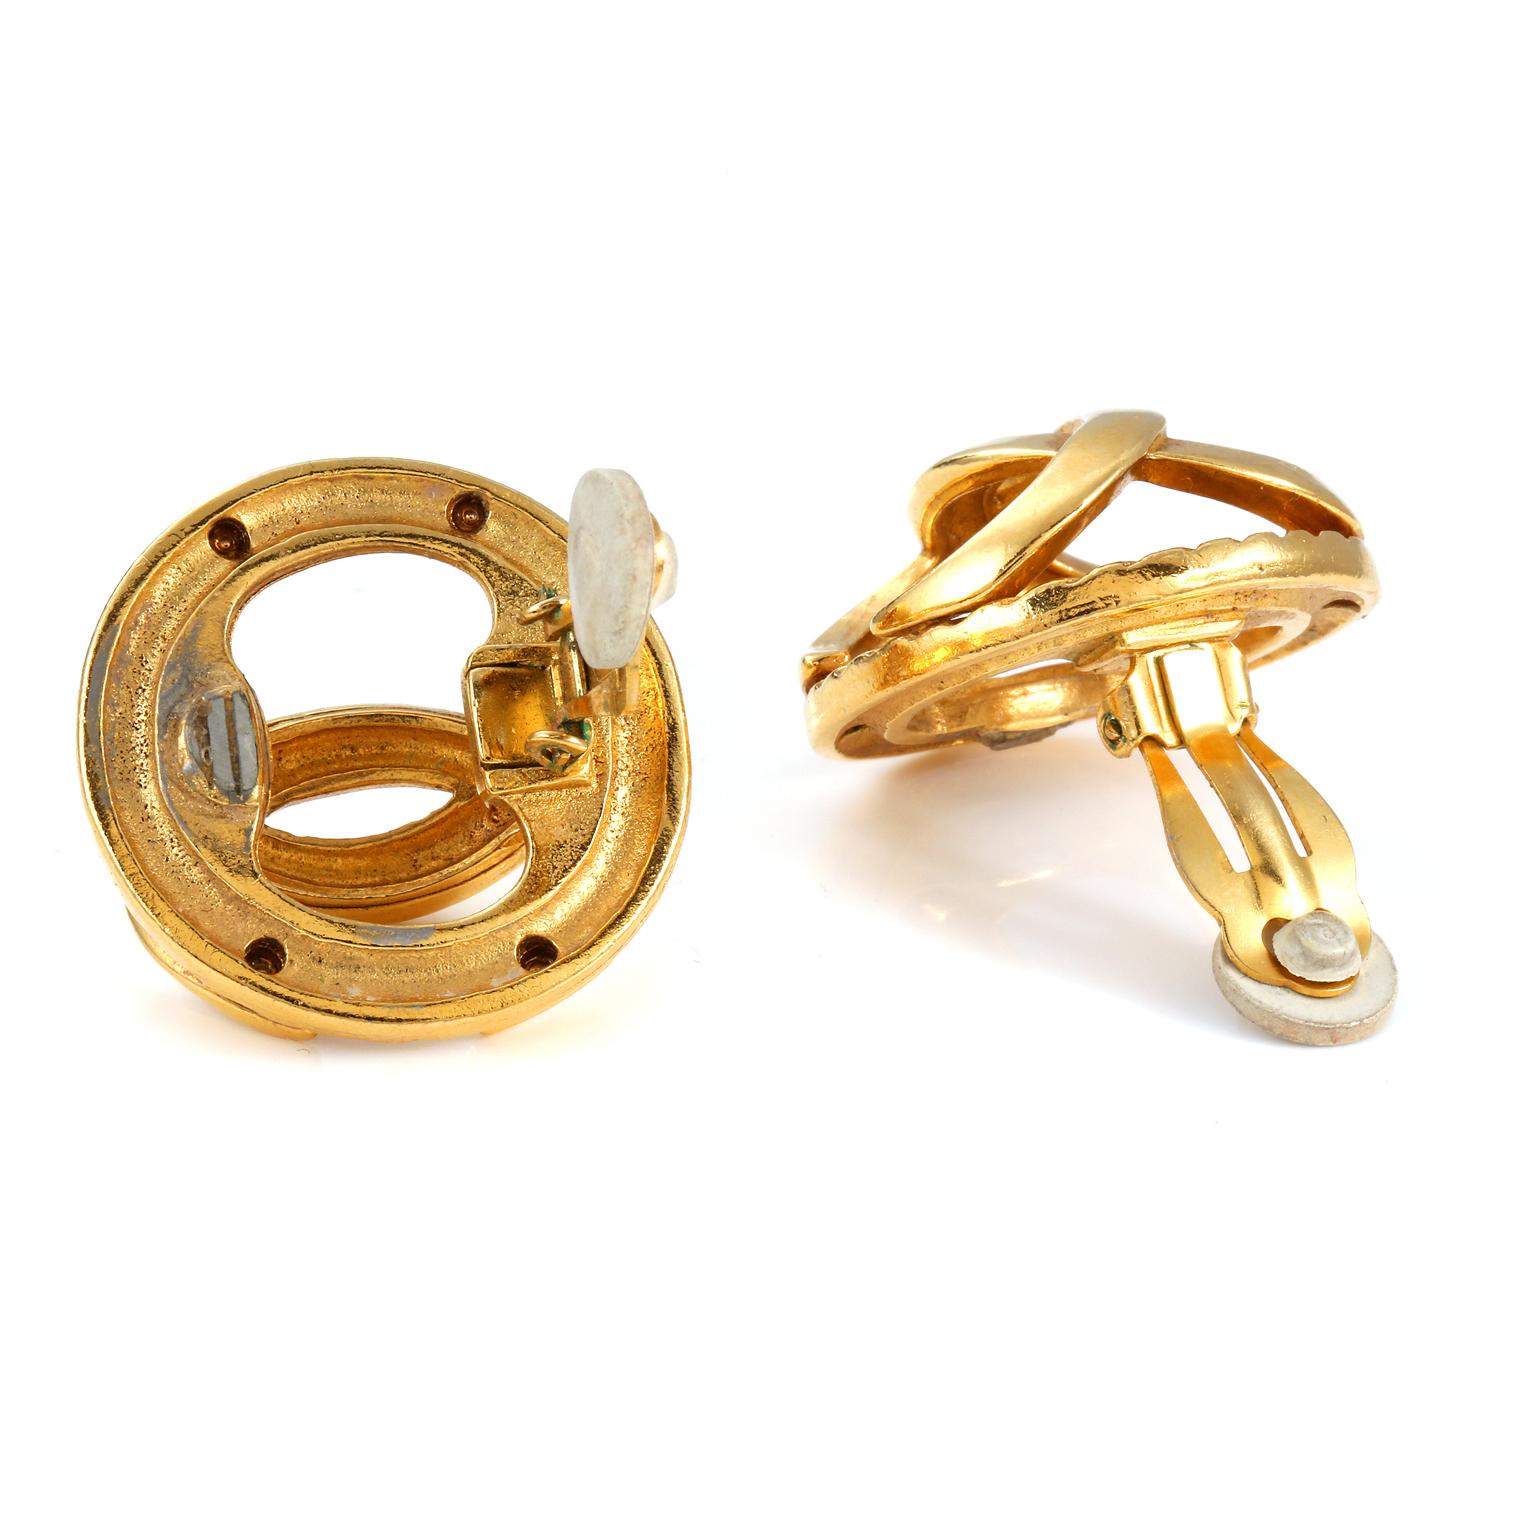 These authentic Chanel Gold CC Cage earrings are in very good vintage condition.  Gold interlocking CC in a convex formation creates a three-dimensional caged earring.  Clip on closure. Pouch or box included. 

